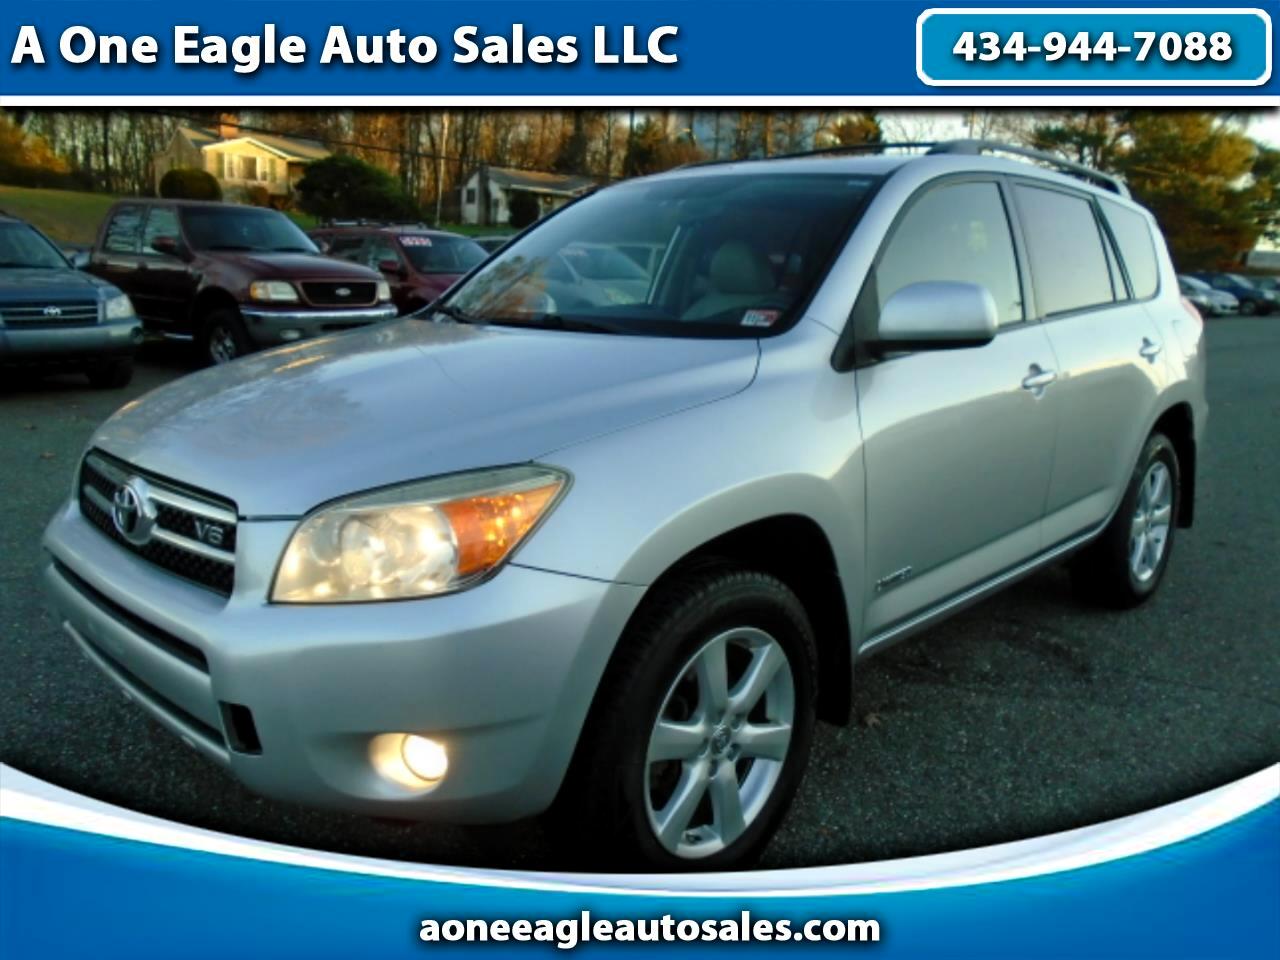 Used 2008 Toyota RAV4 Limited V6 4WD for Sale in Lynchburg VA 24572 A ...